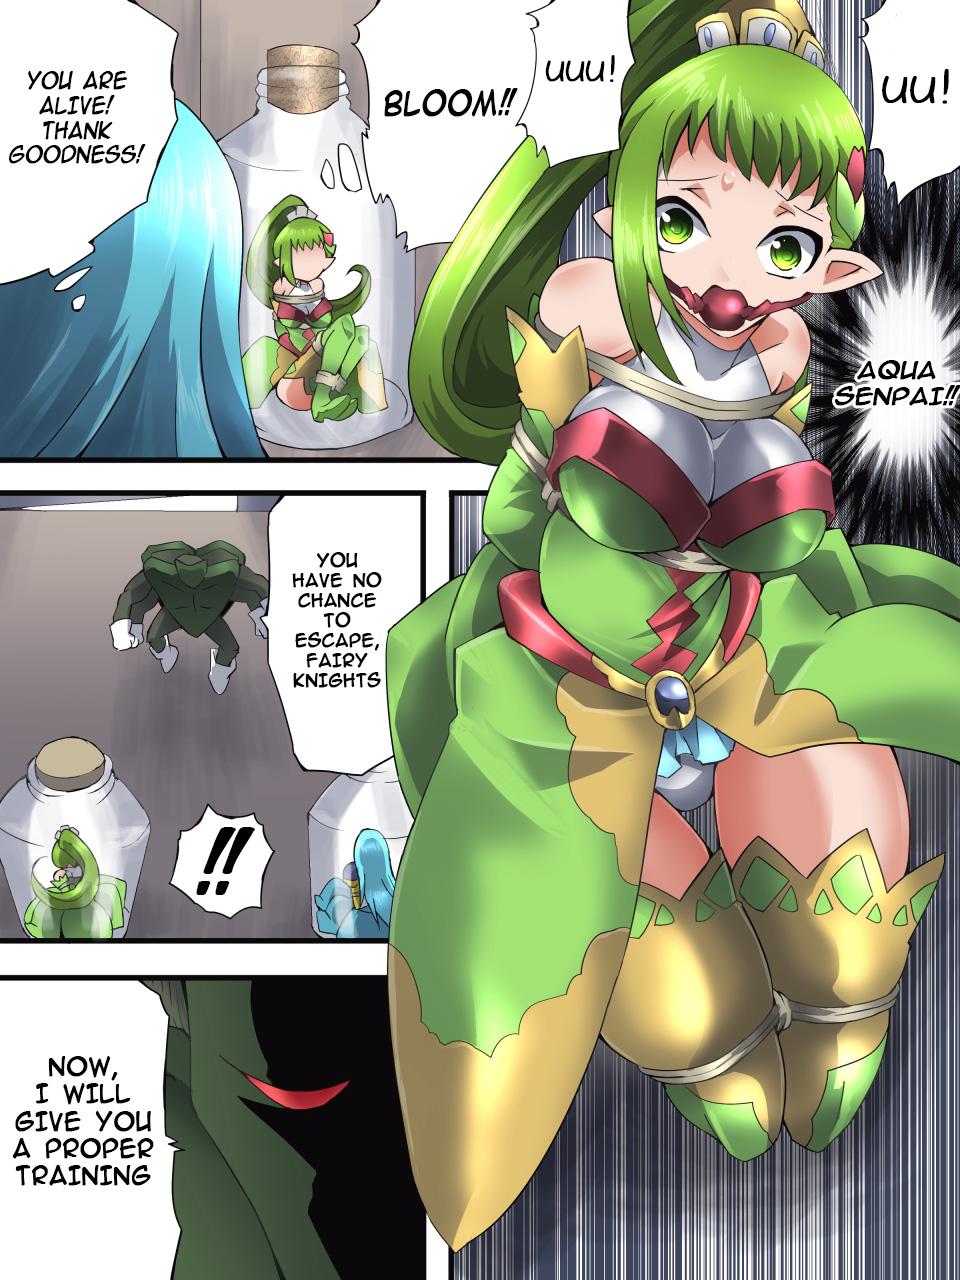 Couples Fucking Fairy Knight Fairy Bloom Ep3 English Ver. - Original Francaise - Page 4